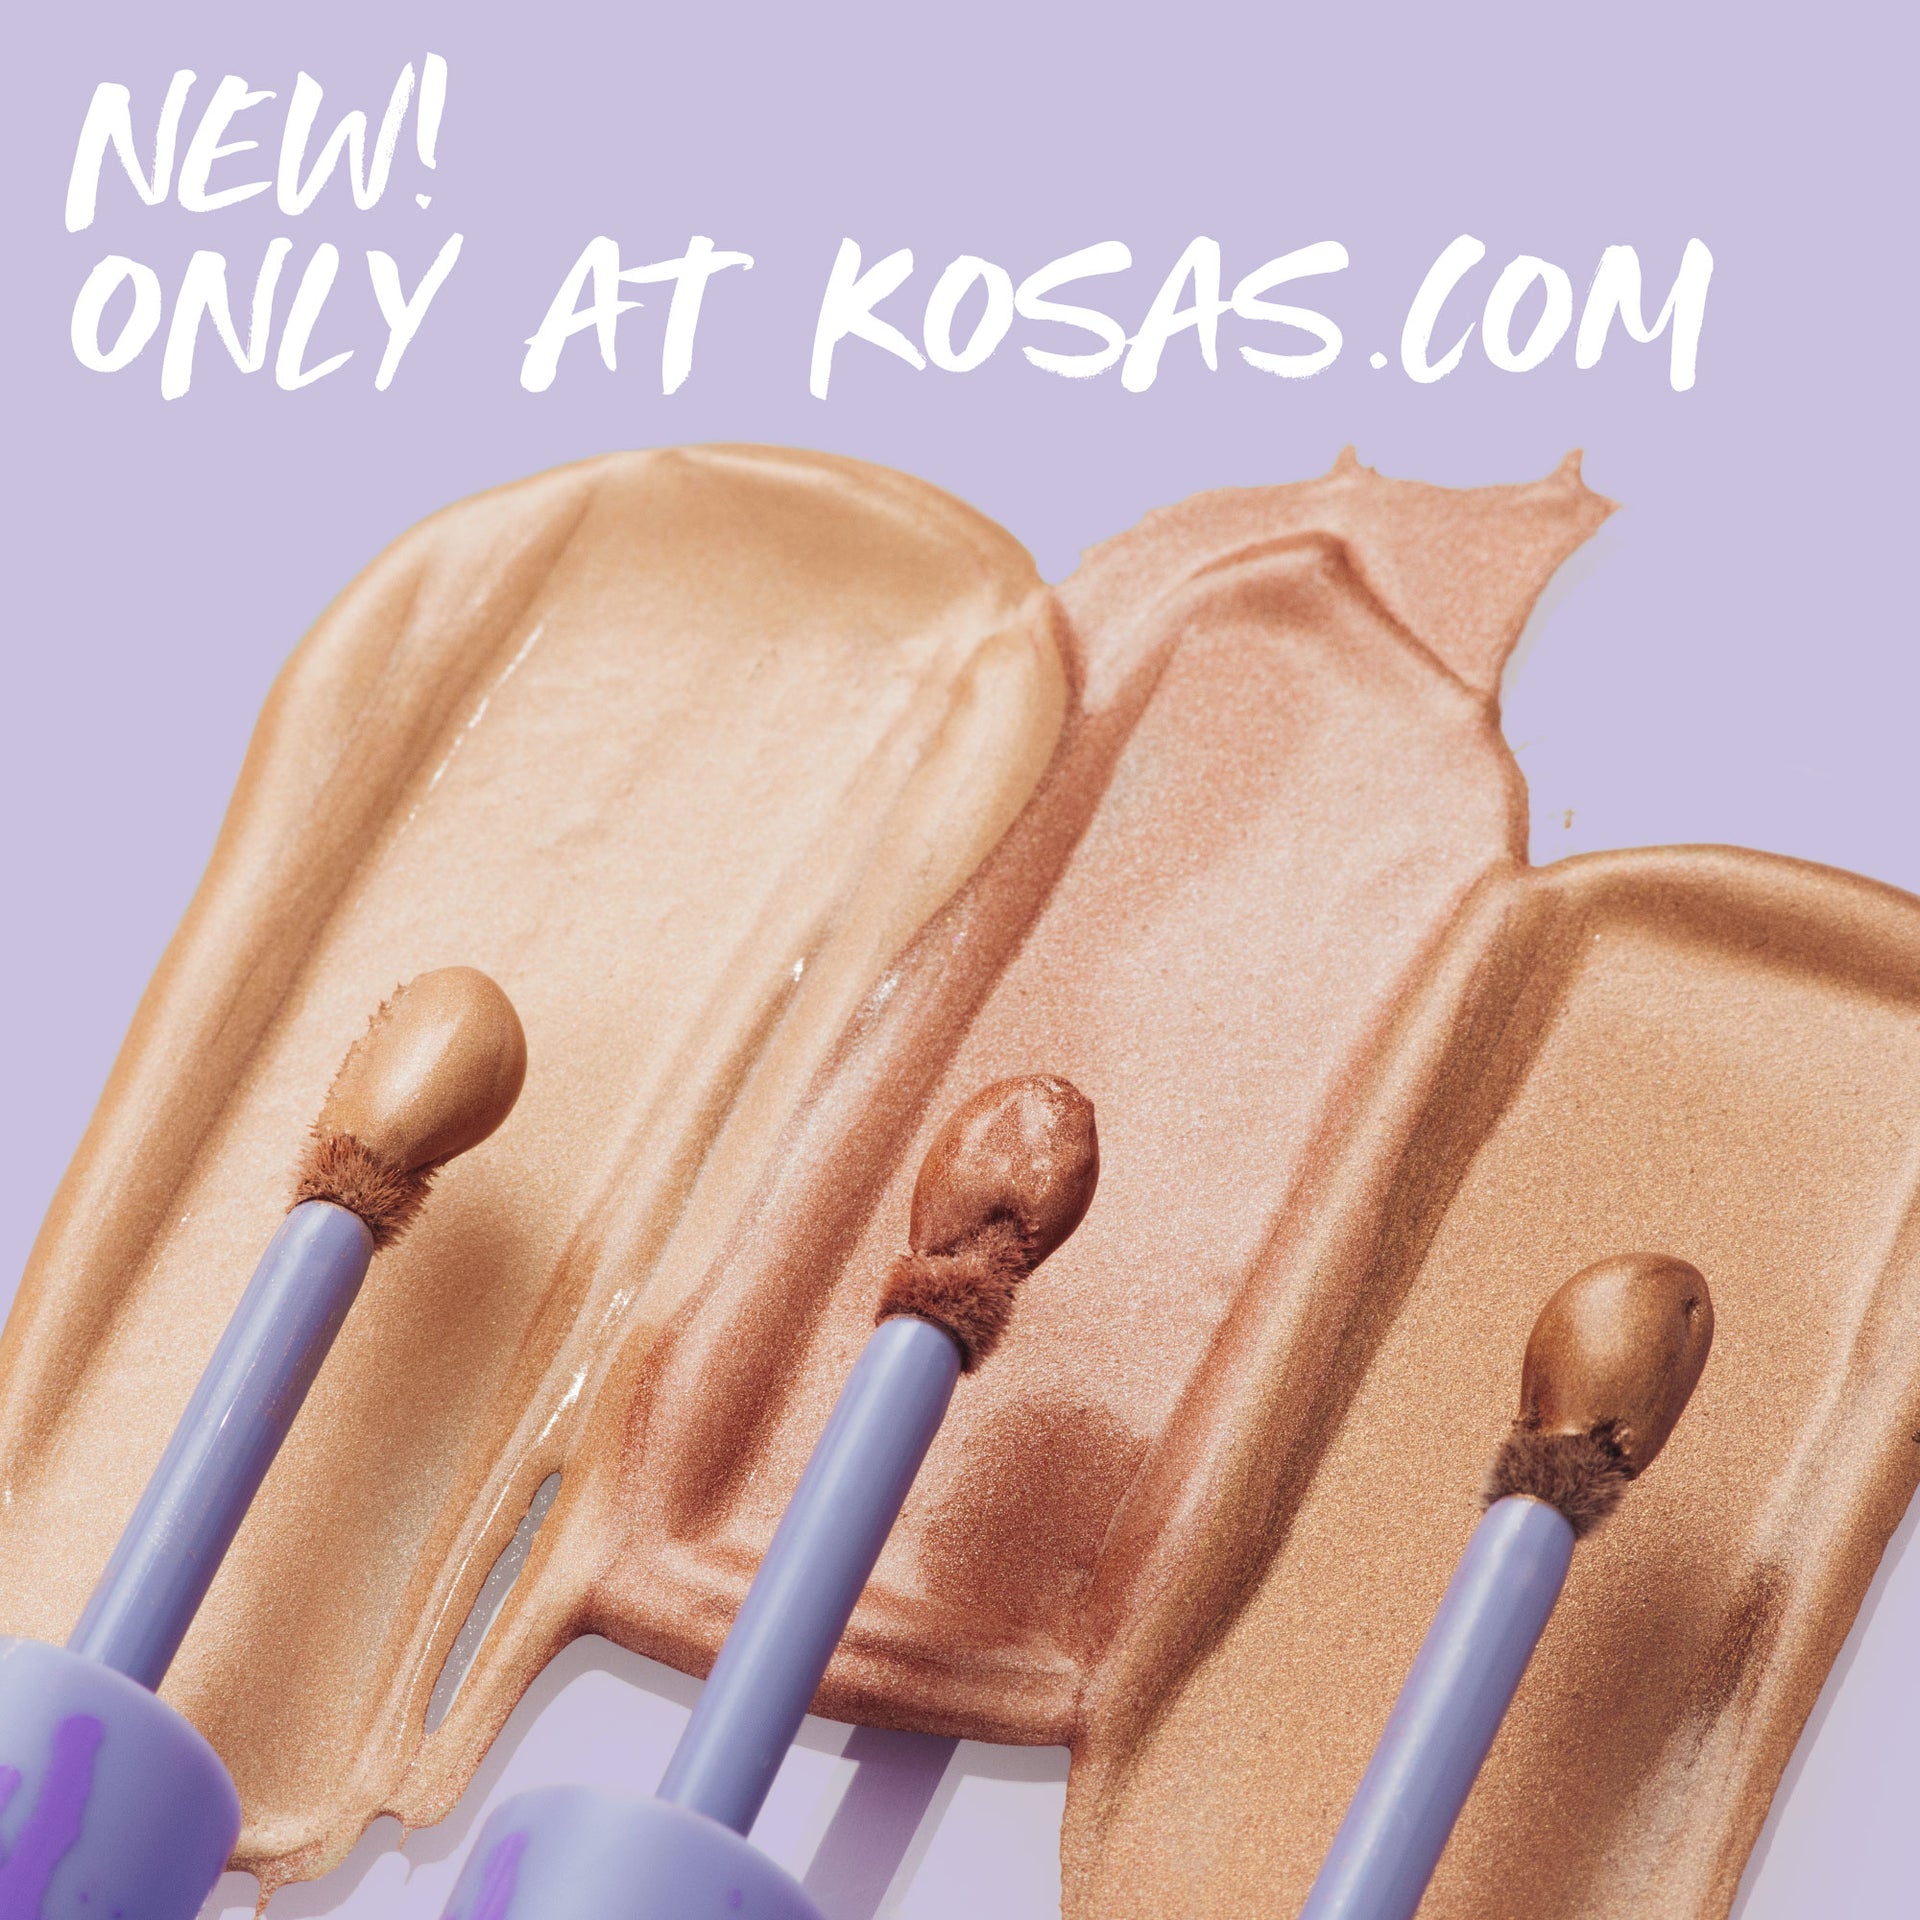 New! Only at Kosas.com